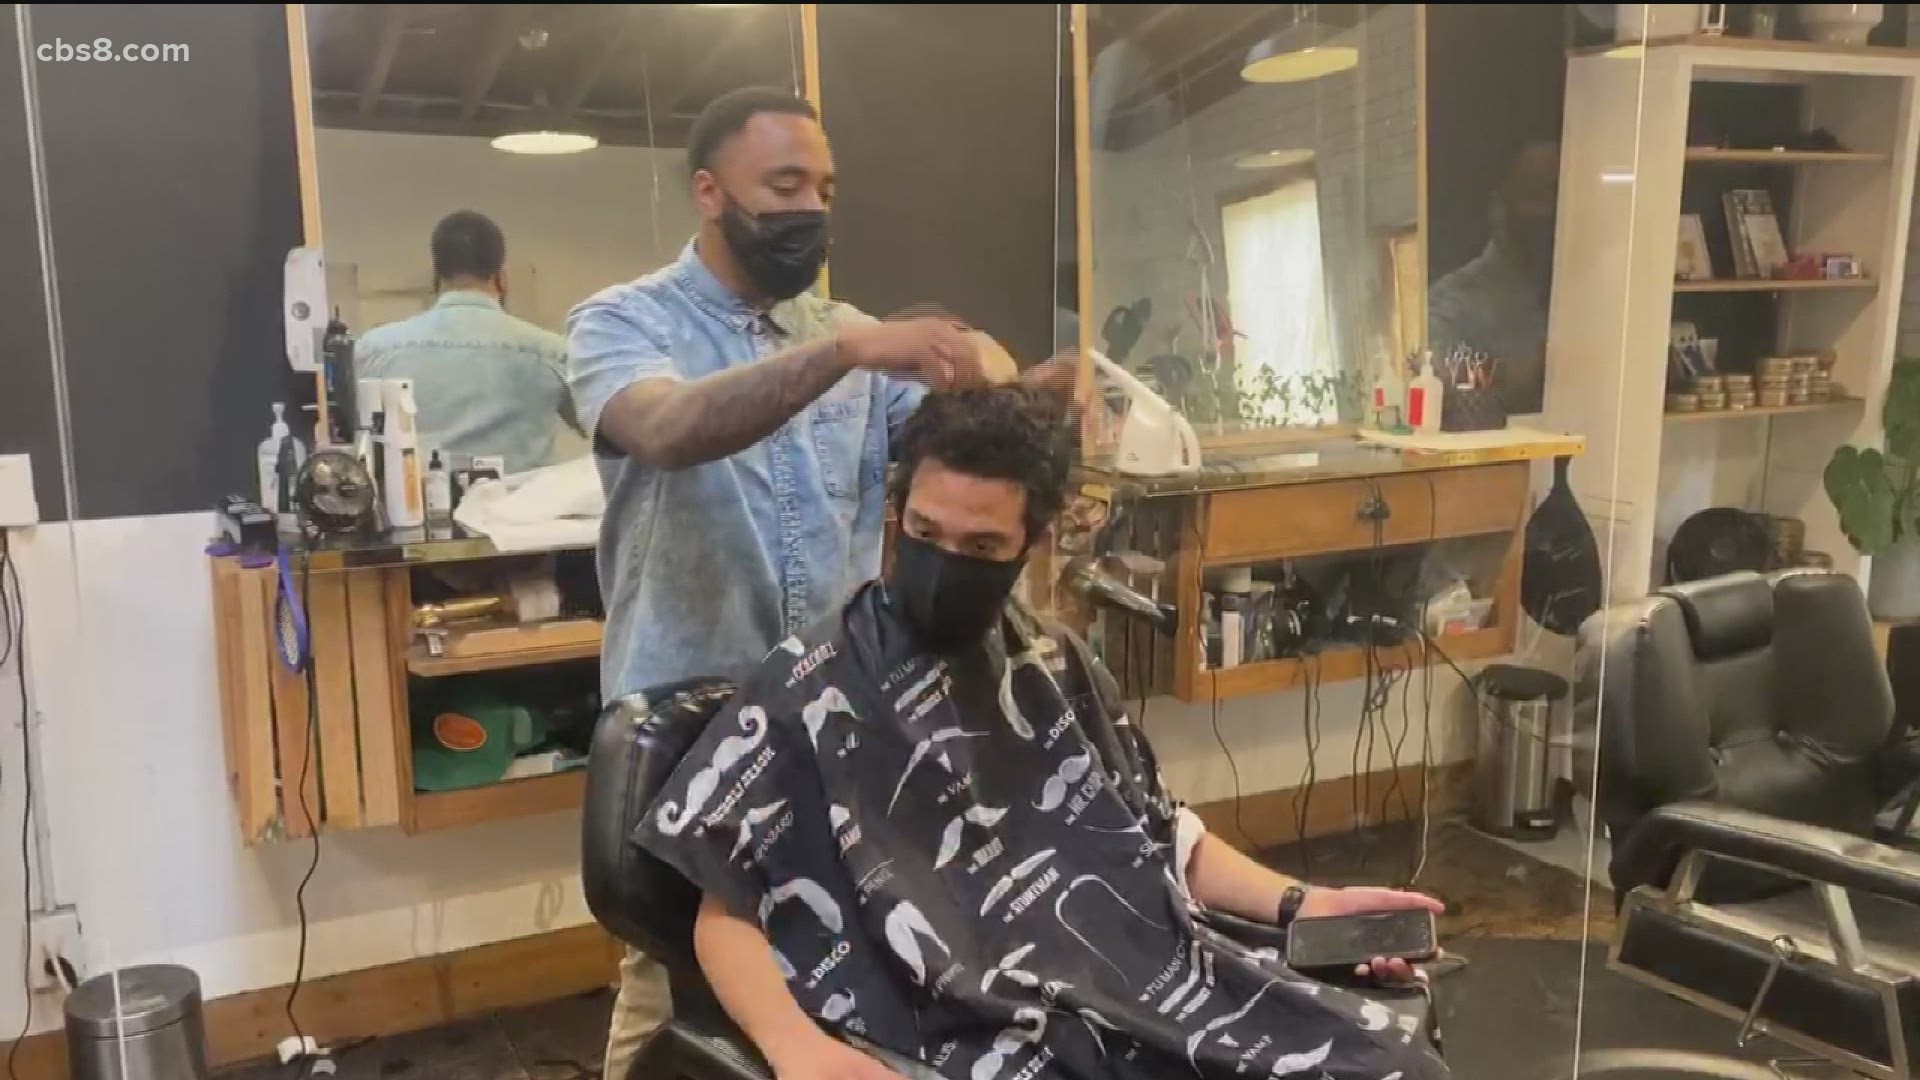 Freshly Faded Barber Shop is a black-owned business located in North Park.